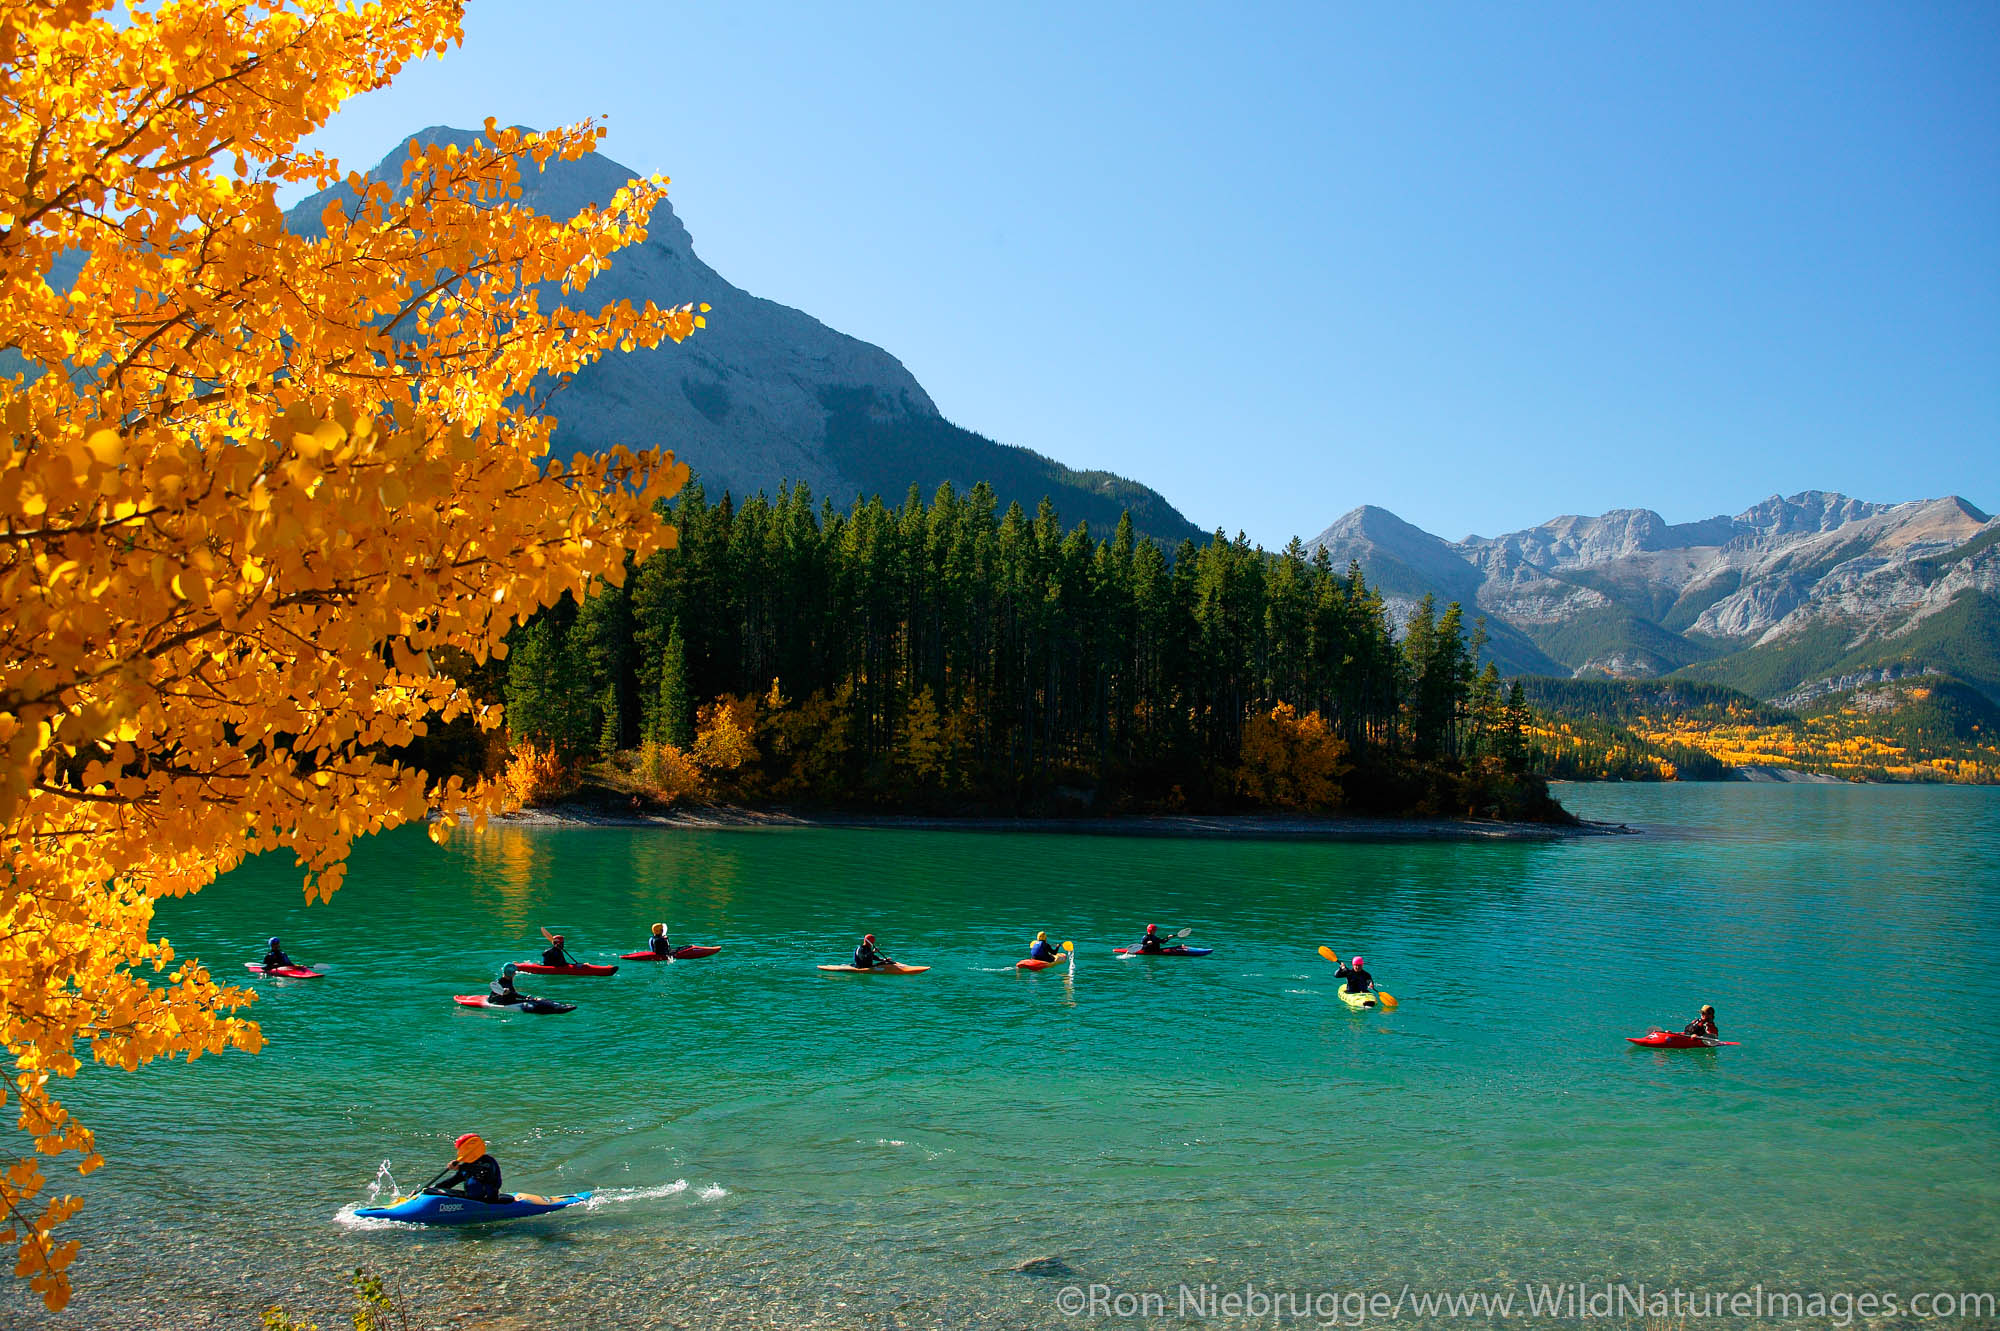 Kayakers on Barrier Lake, Bow Valley Provincial Park, Kananaskis Country, along Highway 40, Alberta, Canada.